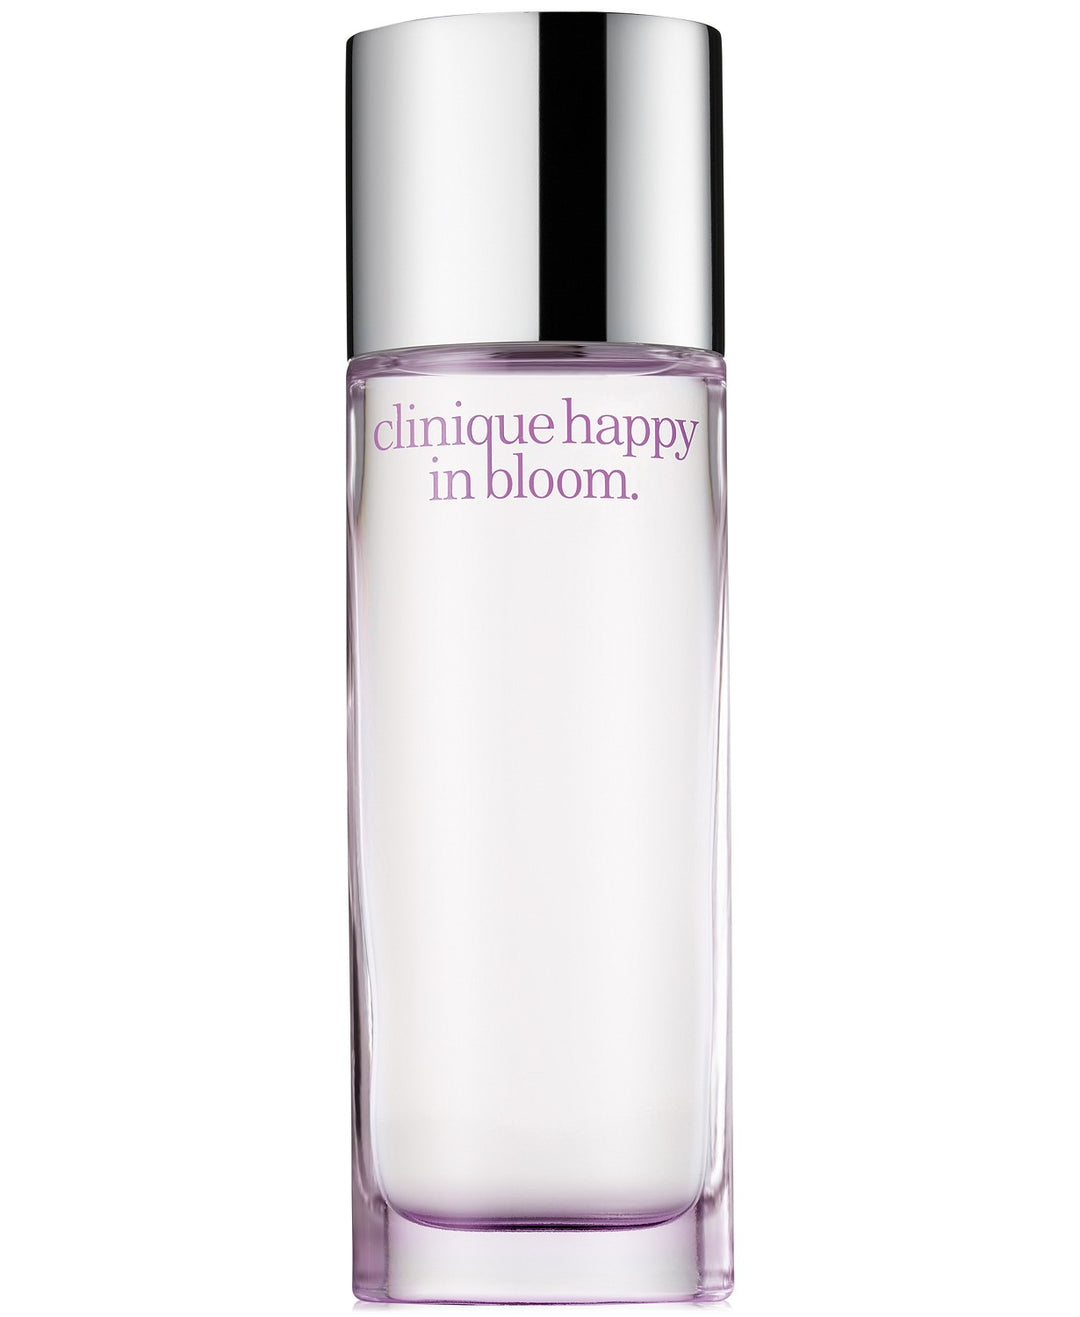 Clinique Happy in Bloom™ Perfume.